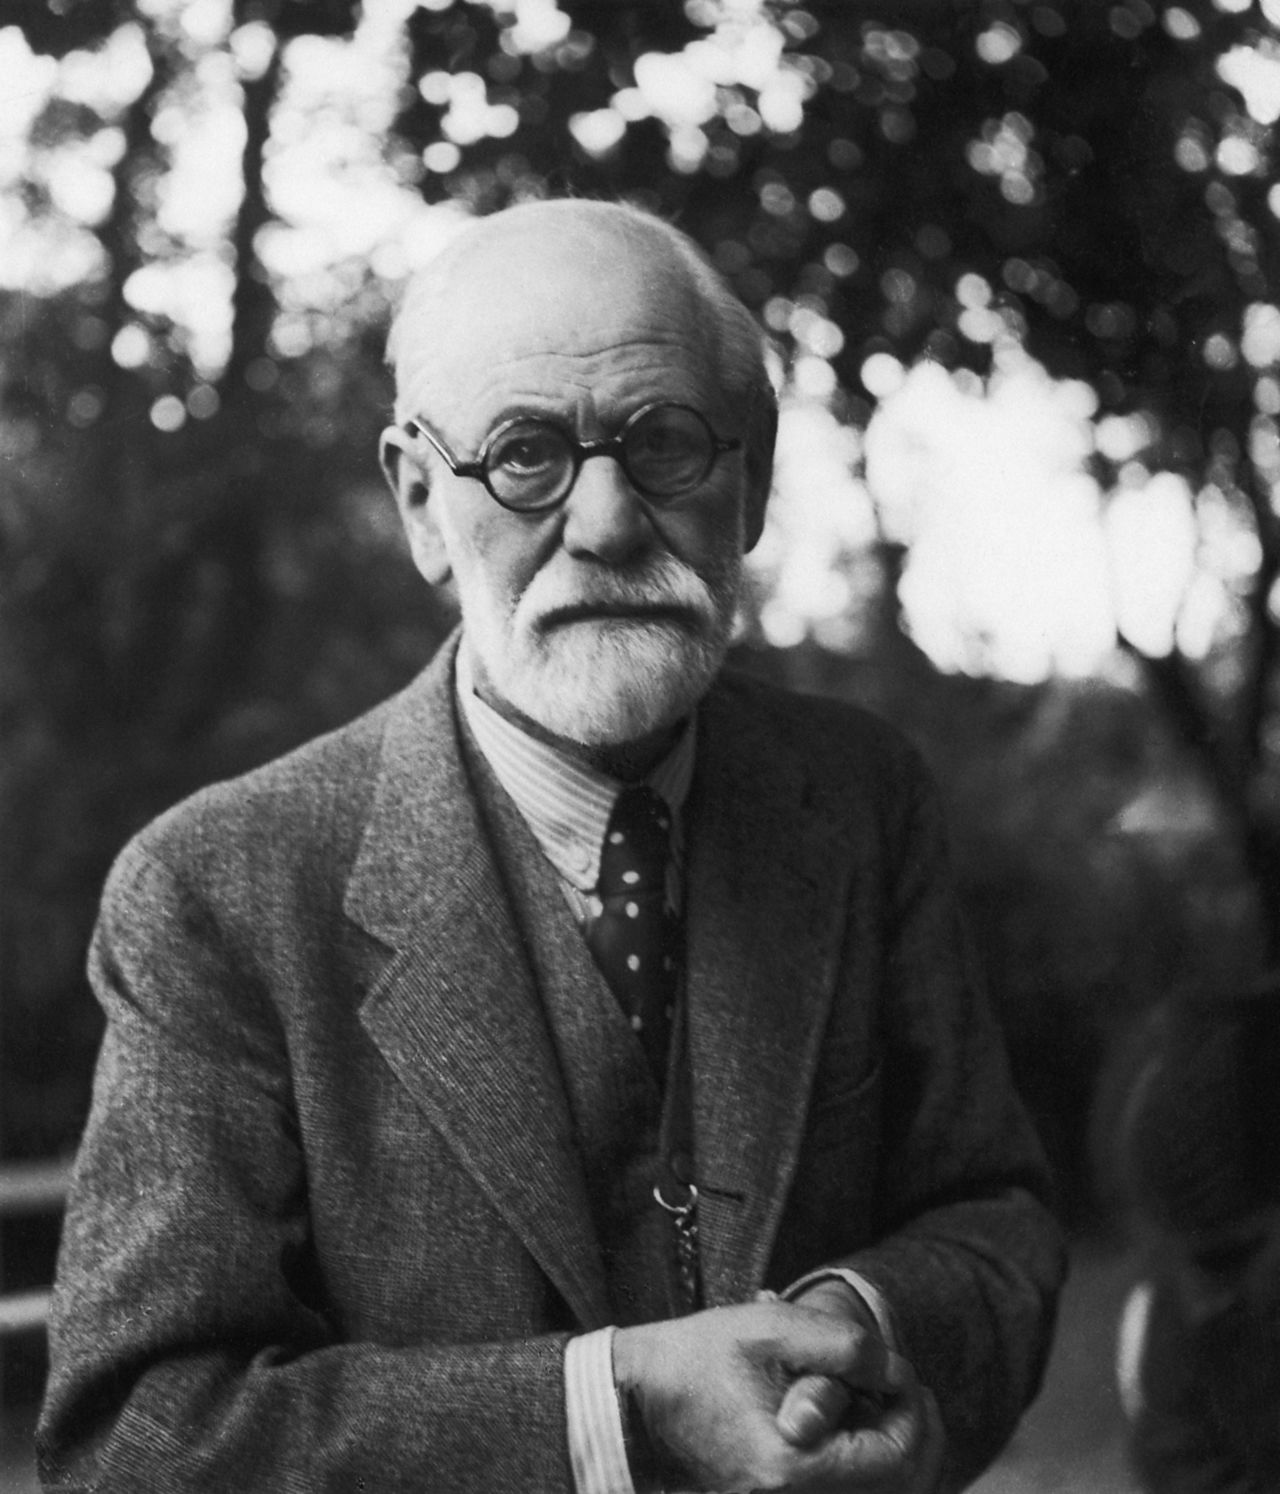 Animals have long been used in therapy. Renowned psychoanalyst Sigmund Freud, who died in 1939, believed dogs helped his patients relax during sessions.